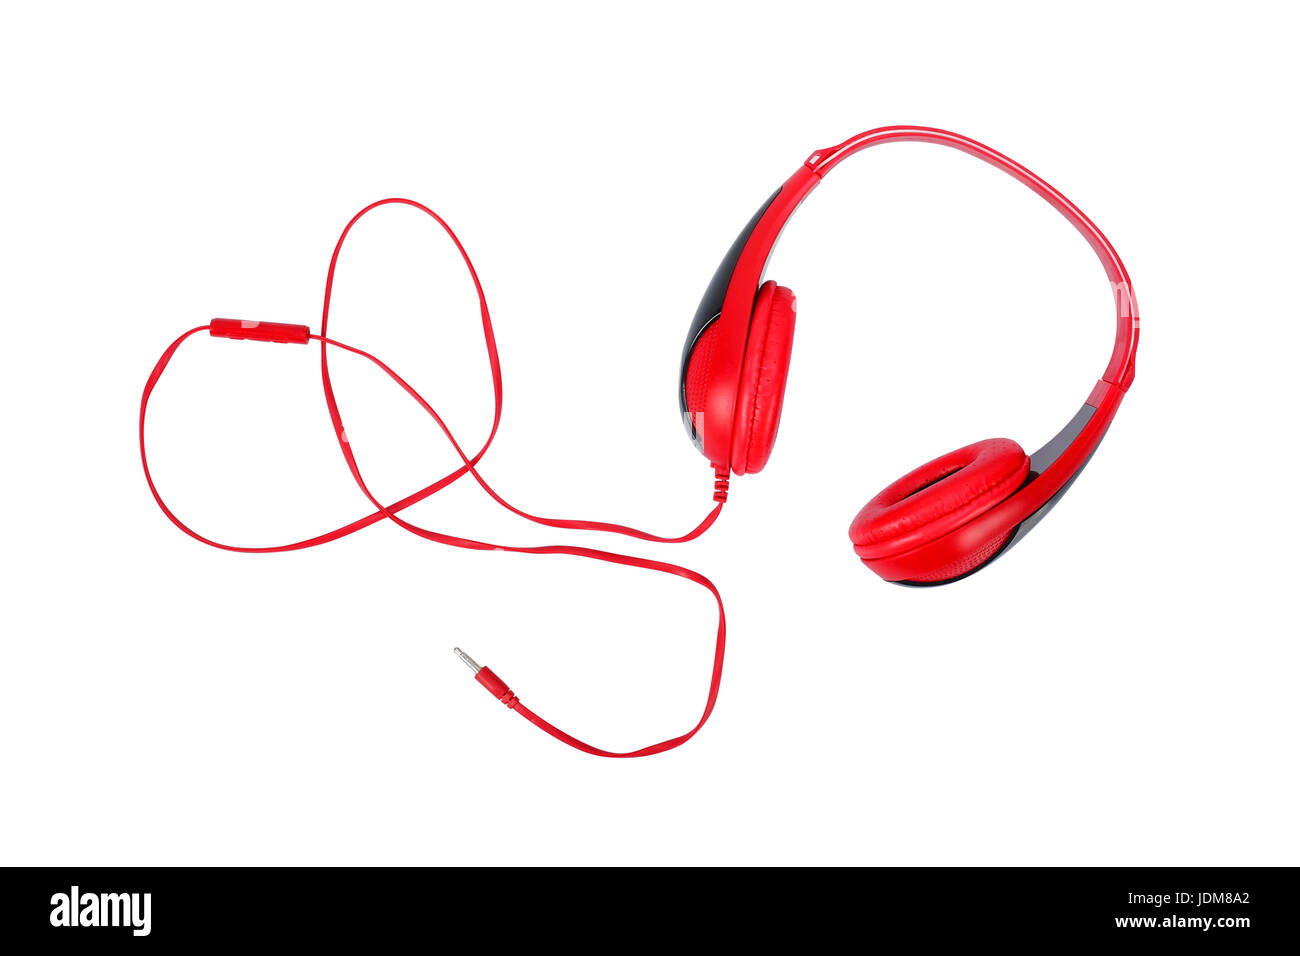 Musical equipment - Red headphone on a white background. Isolated Stock Photo